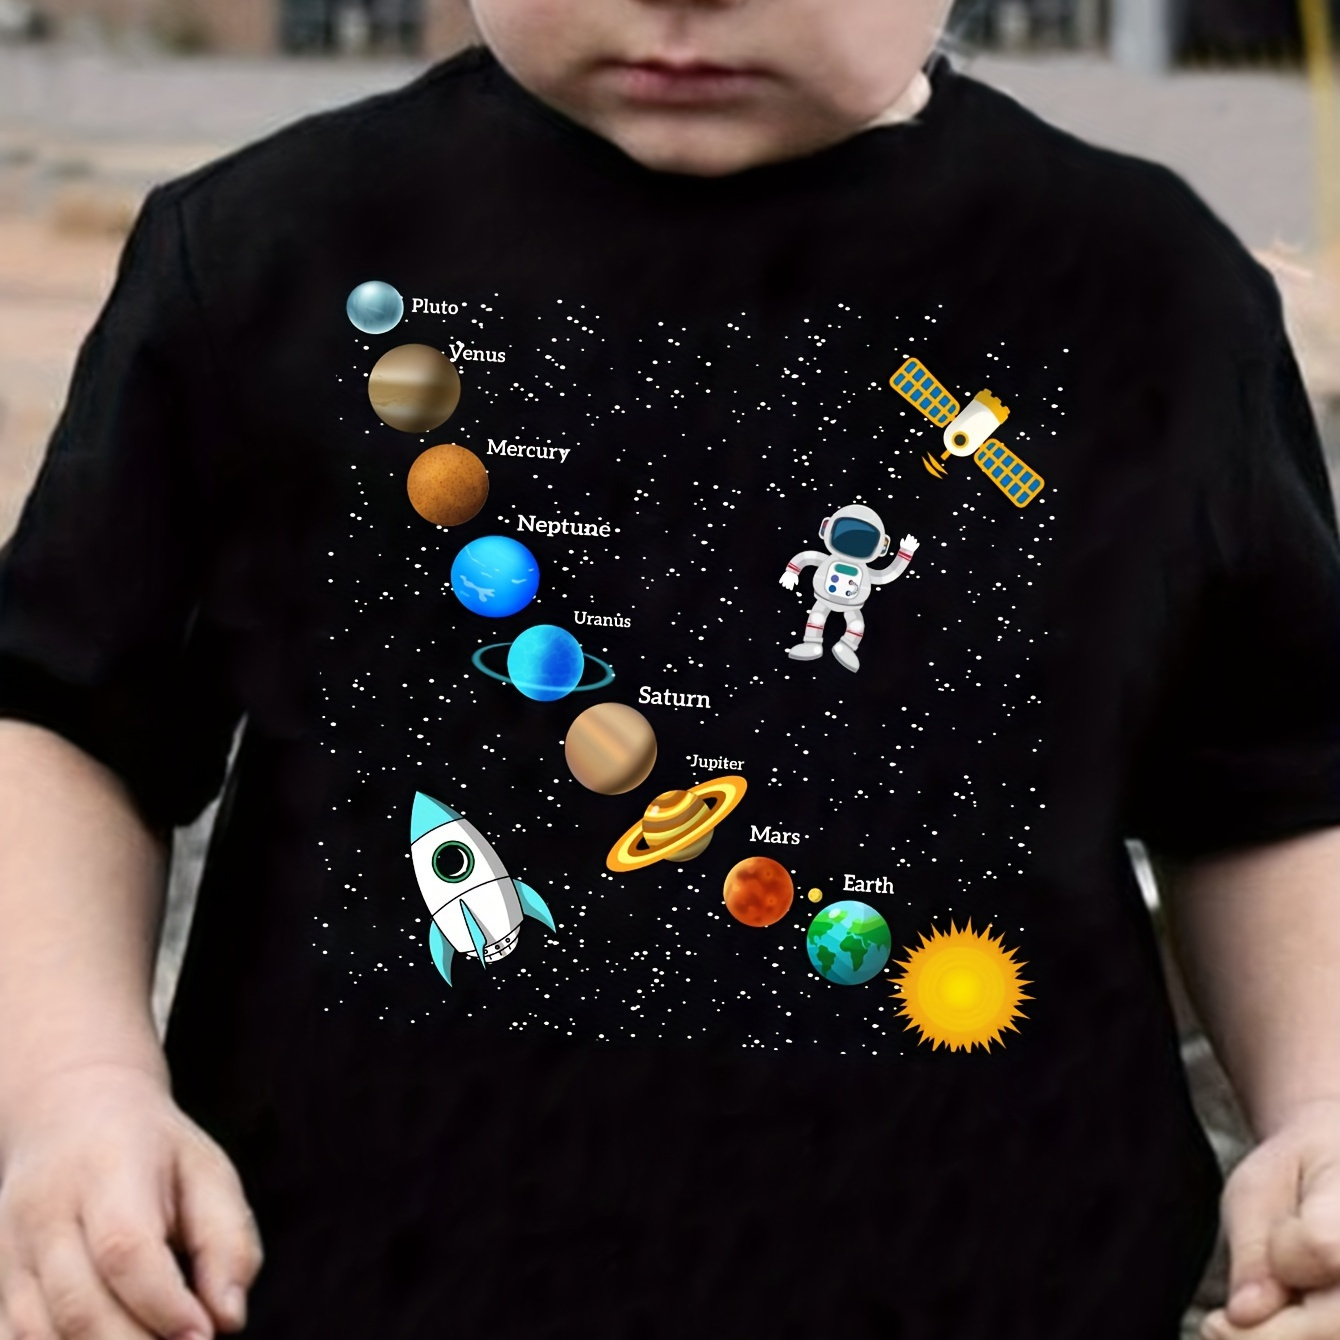 

Casual Trendy Boys' Summer Top - Cartoon Astronaut & Solar System Planet Graphic Short Sleeve Crew Neck T-shirt - Street Outing Tee Tops Gift